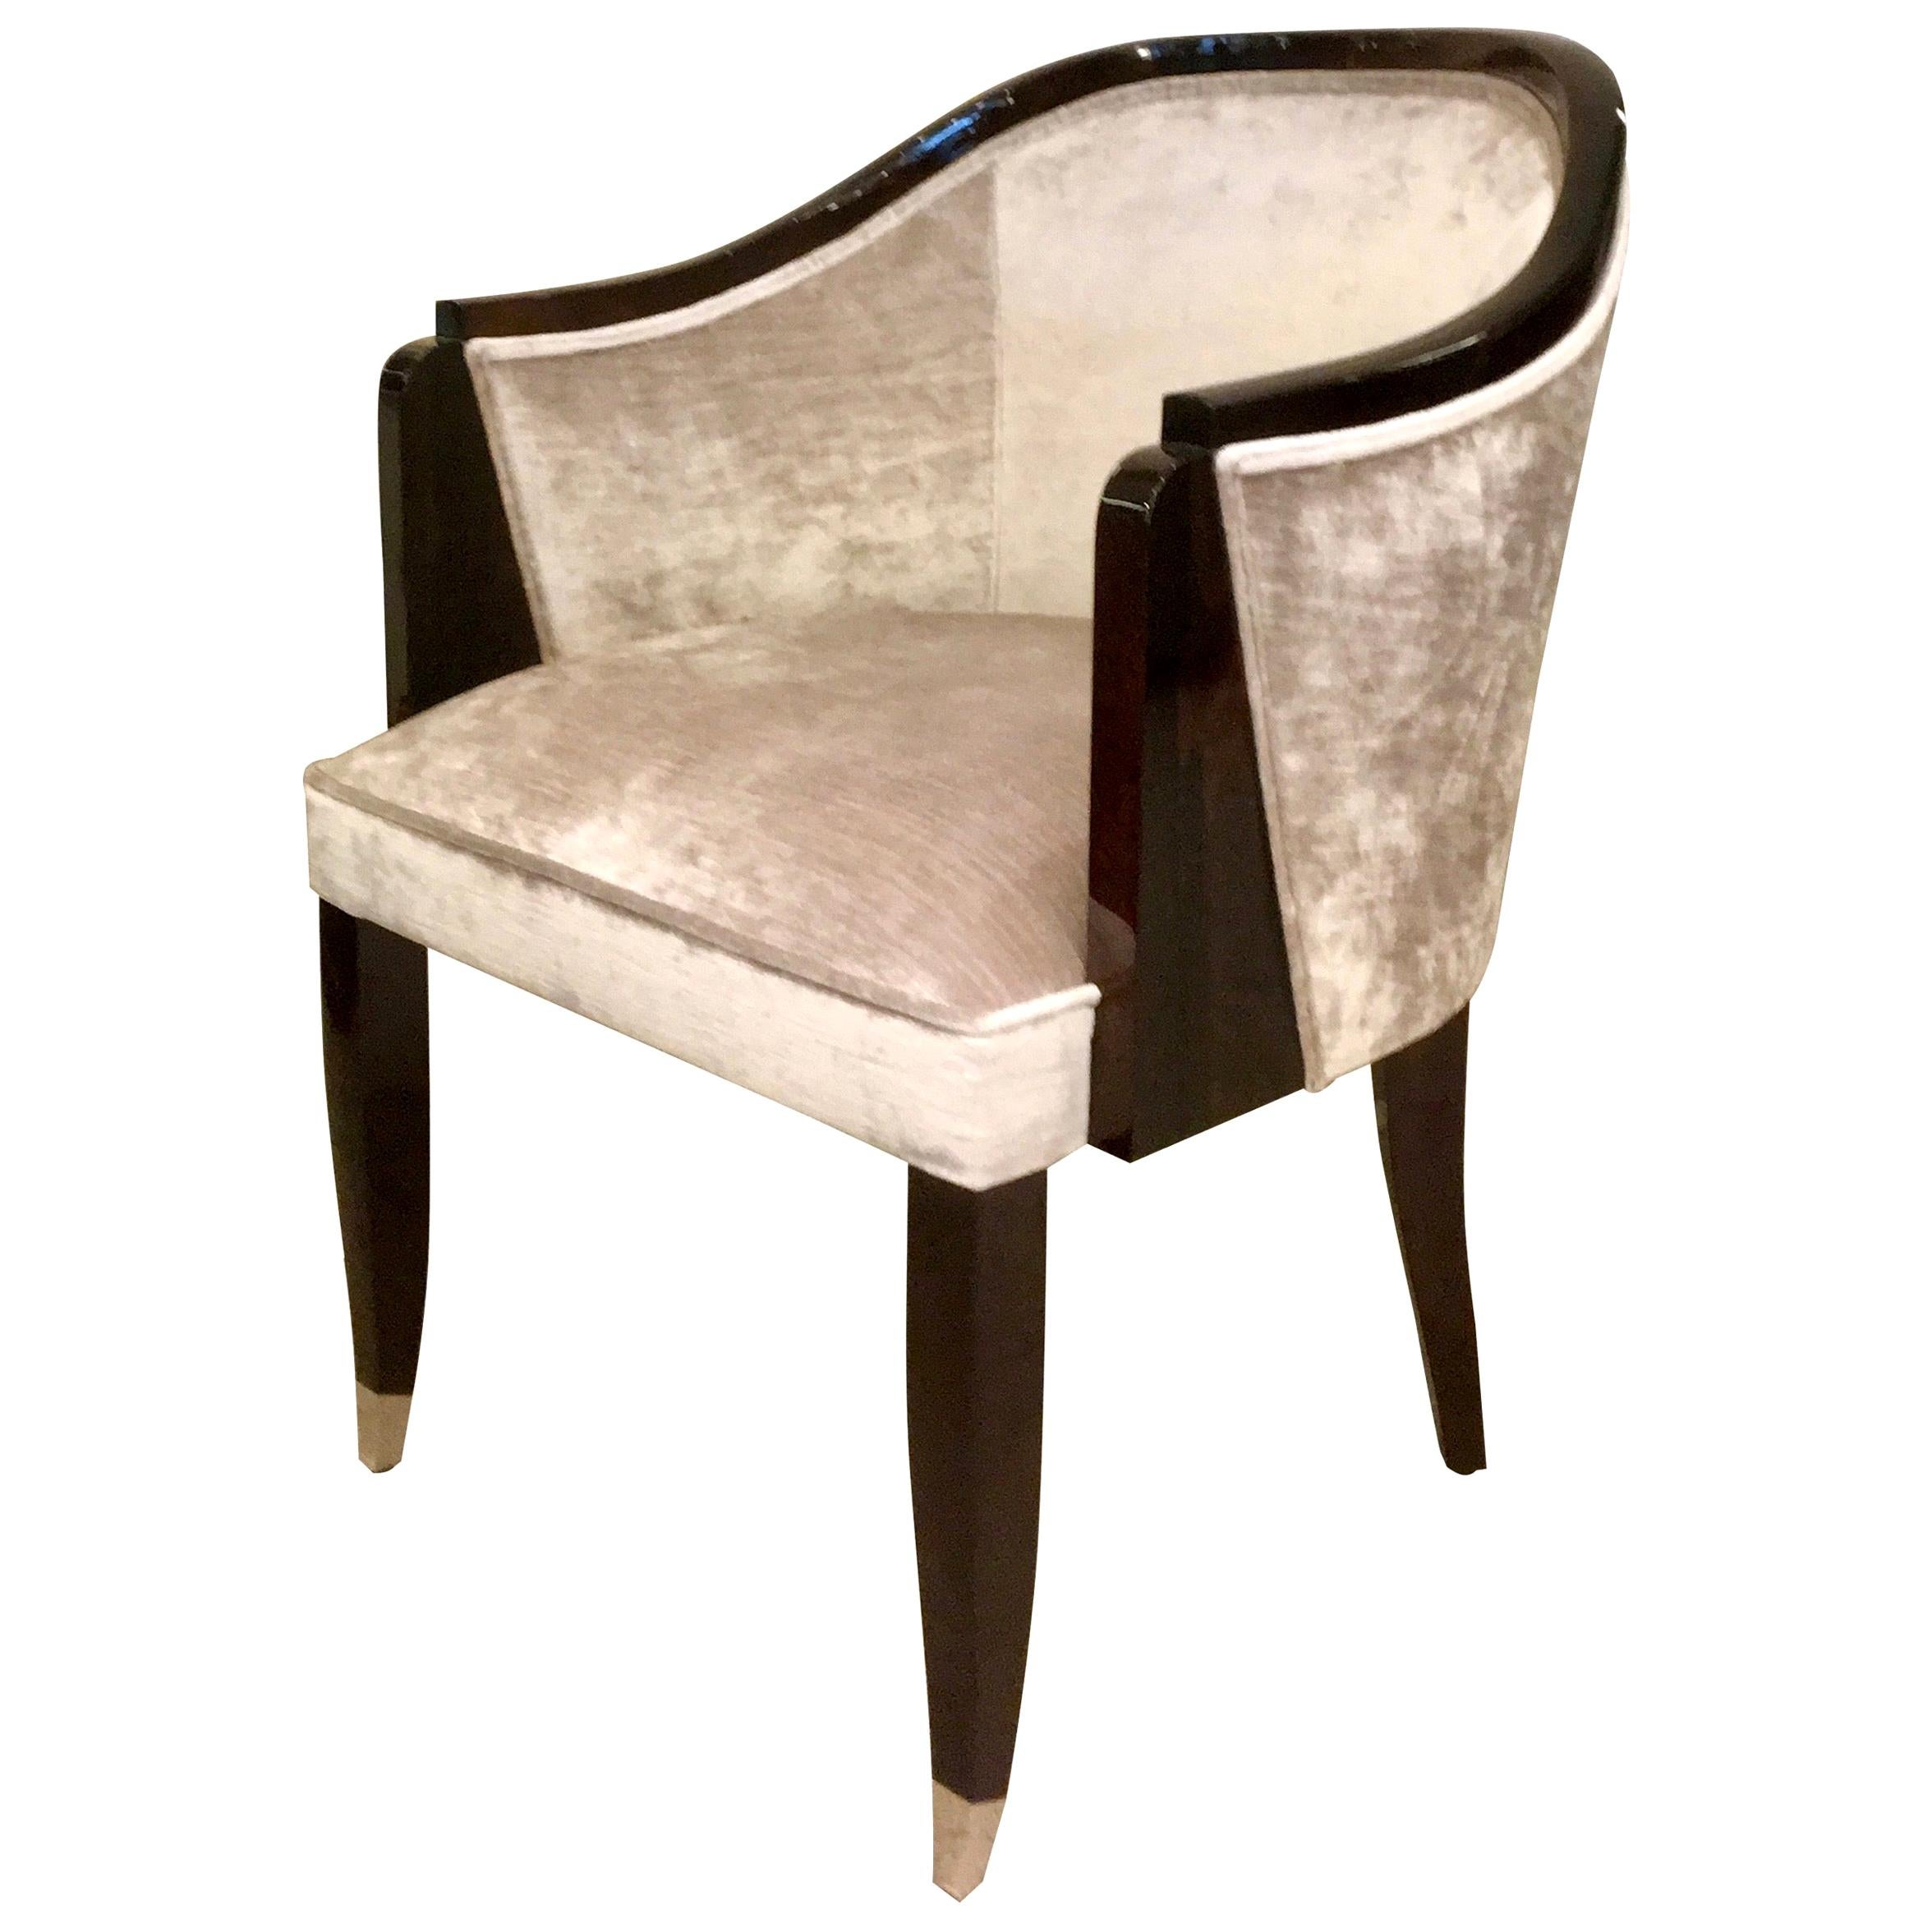 Comfortable Art Deco Style Shell Chair with Fabric Upholstery and Lacquered Wood